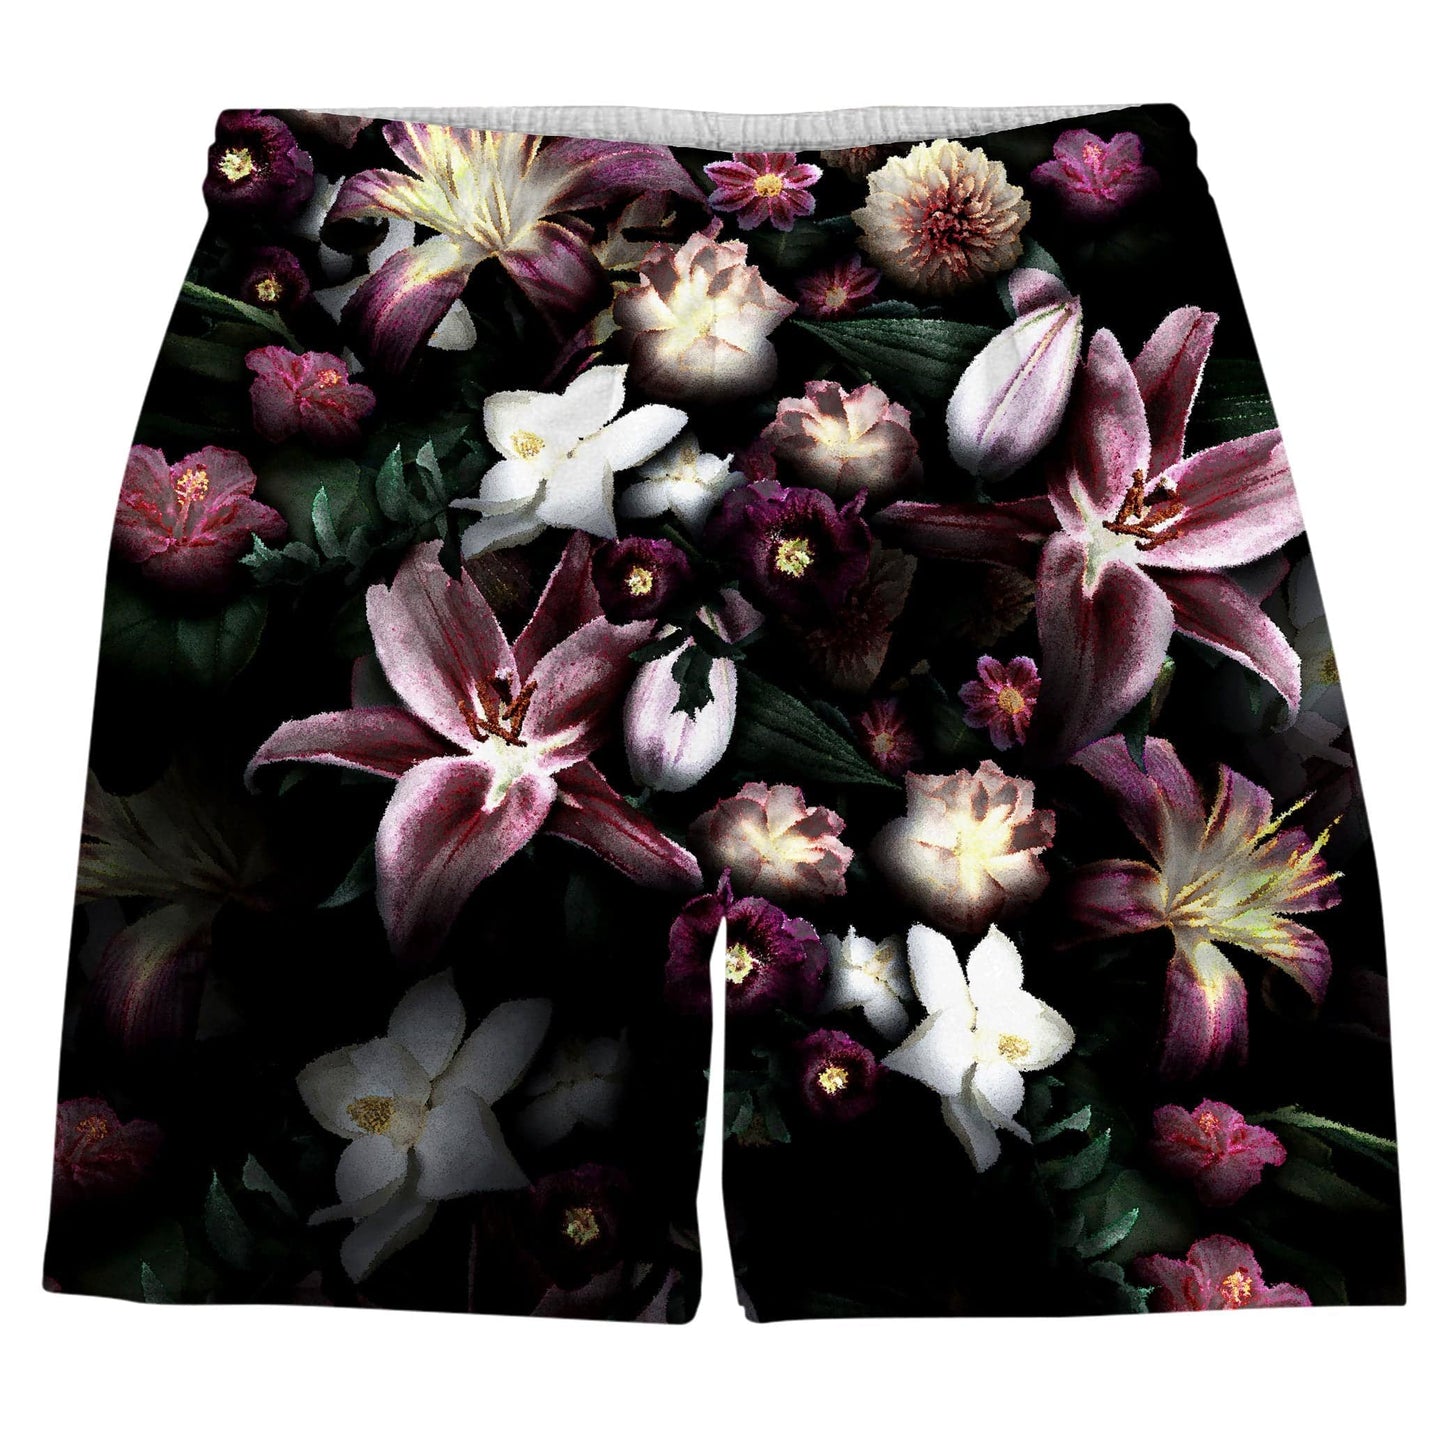 Blooming Teal T-Shirt and Shorts Combo, Yantrart Design, | iEDM